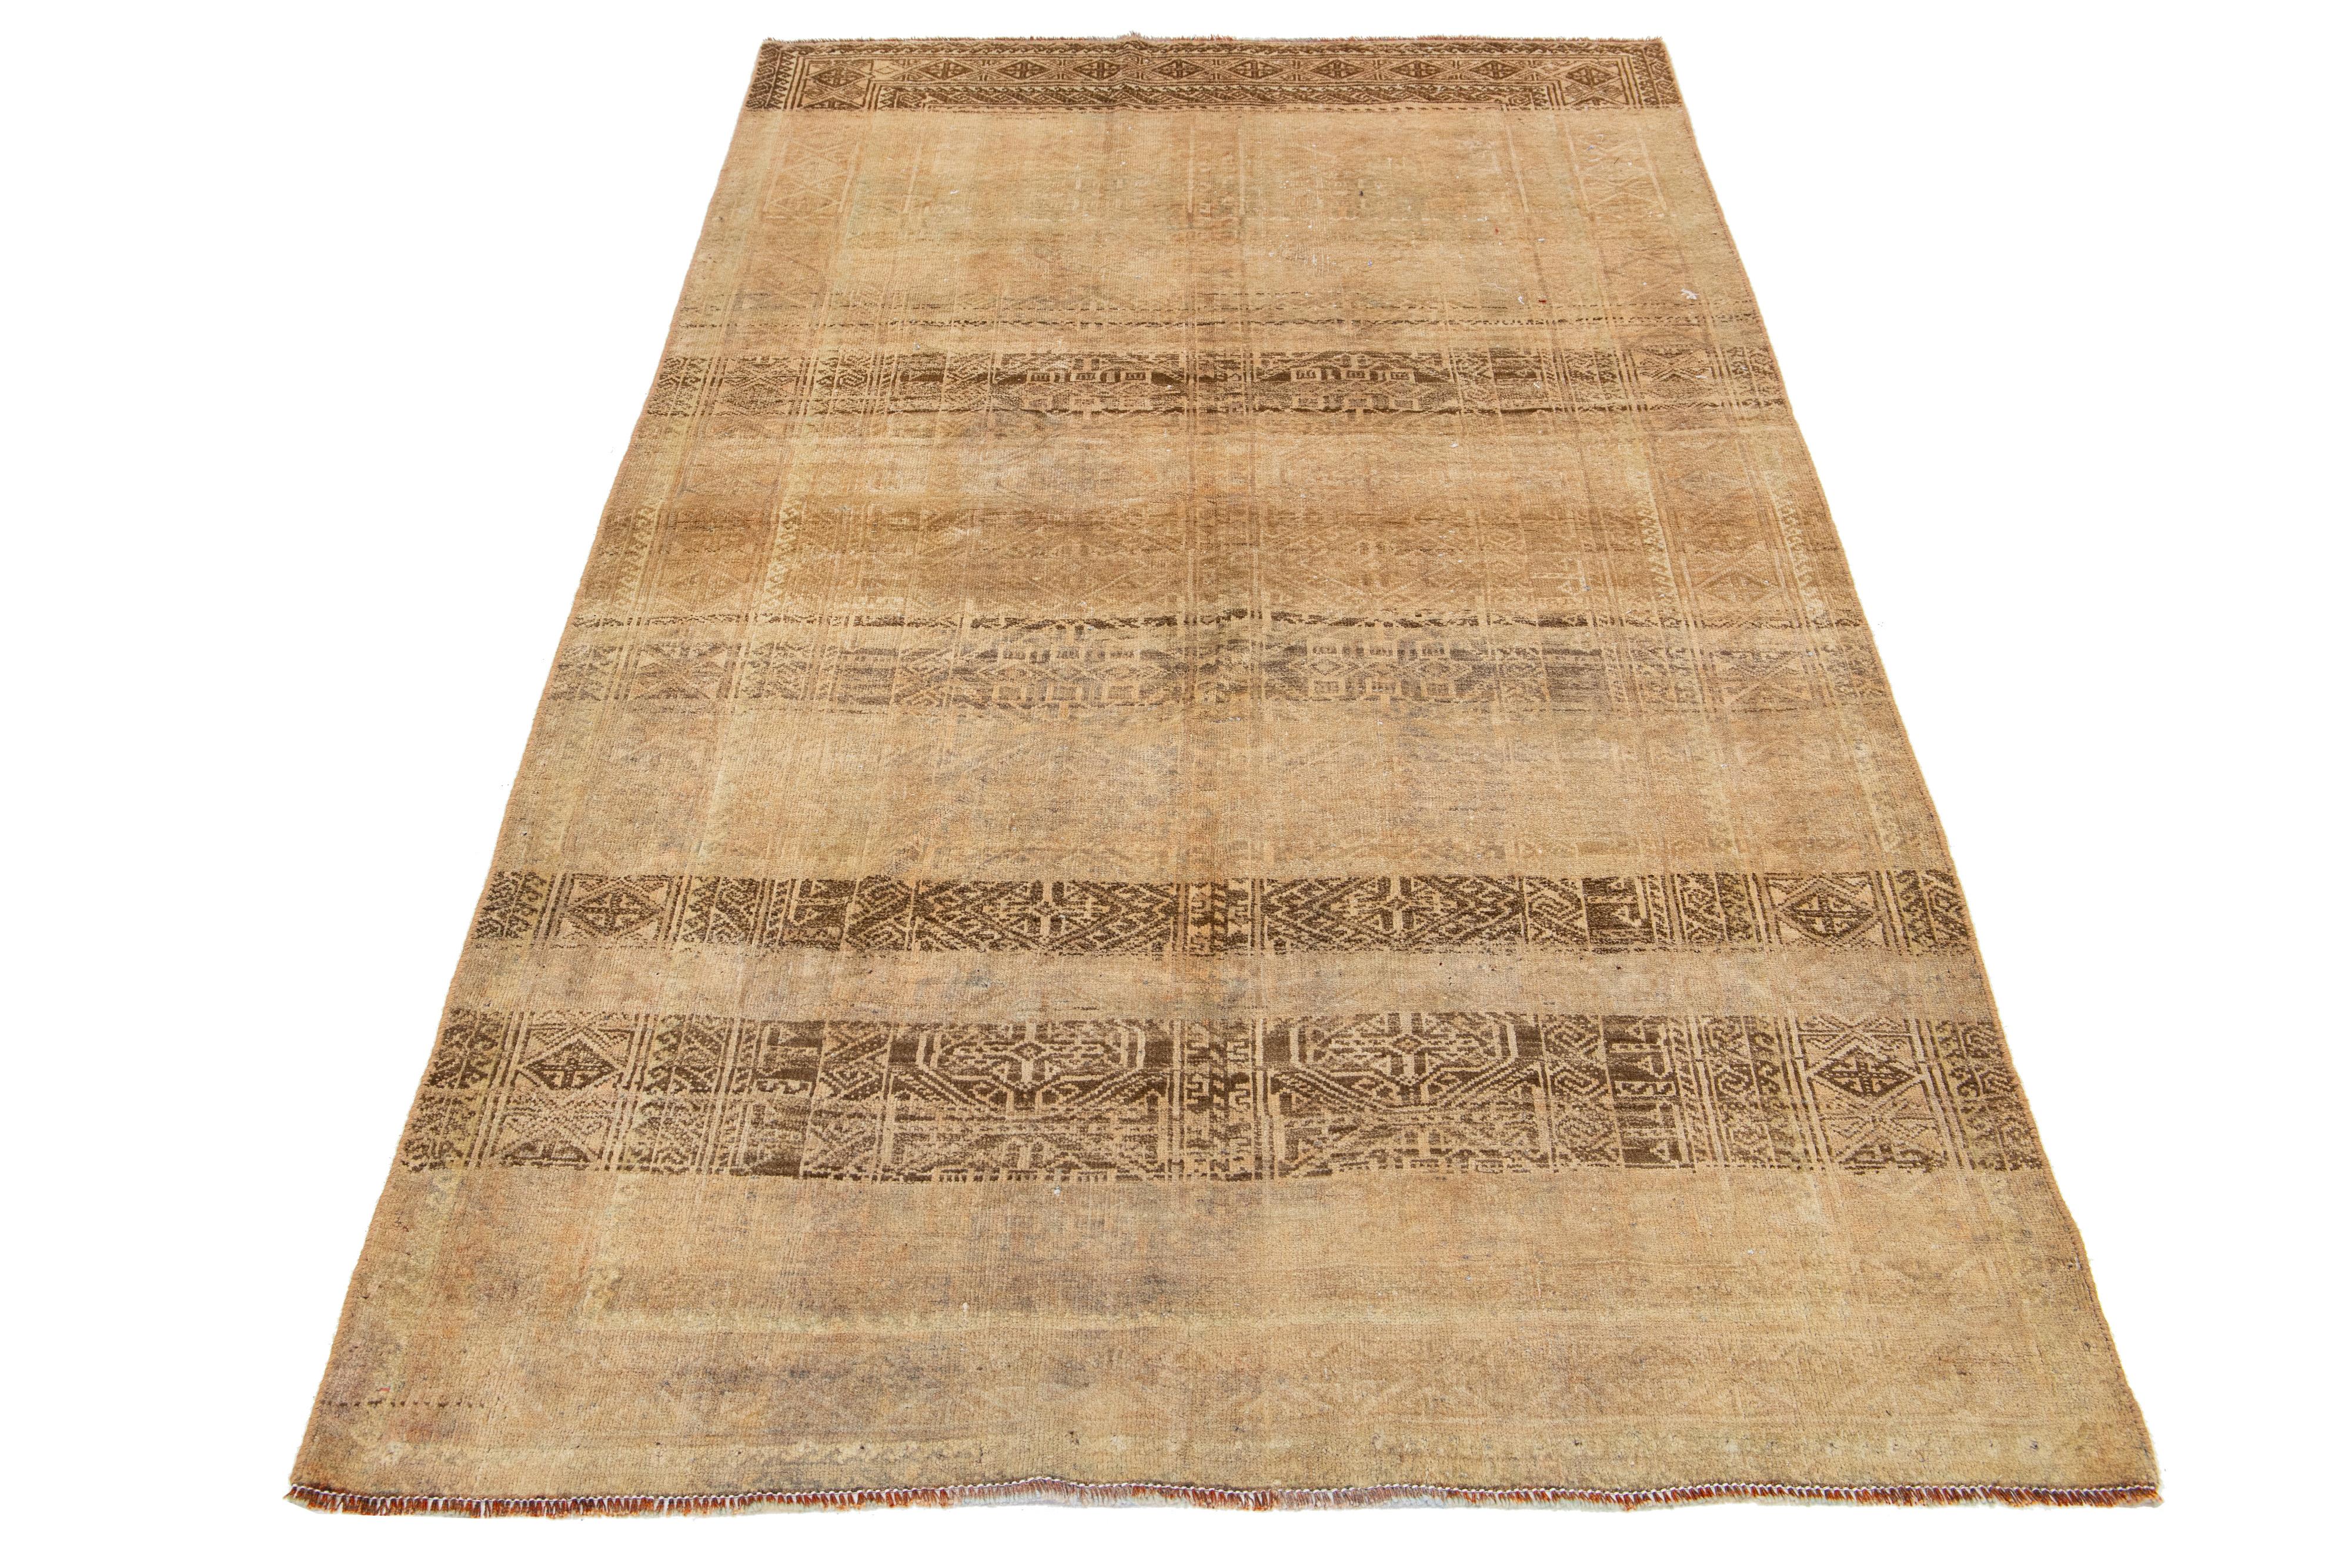 This antique Hamadan rug is hand-knotted from premium wool, boasting a beige field complemented by a captivating, all-over pattern design with brown accents.

This rug measures 4'2